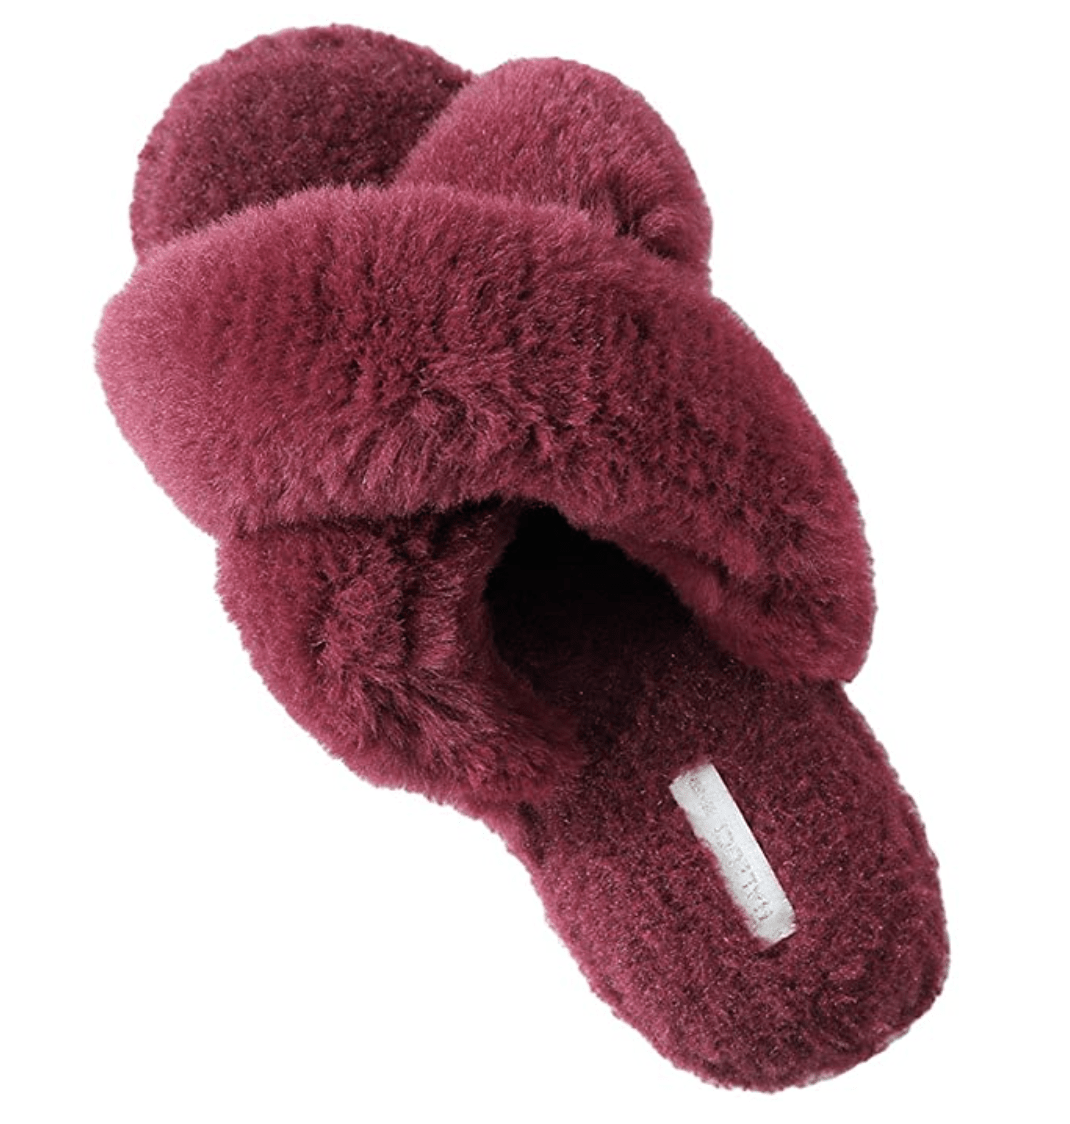 Whirlpool Fugtig hæk These fleece slippers are perfect for fall — and just $22